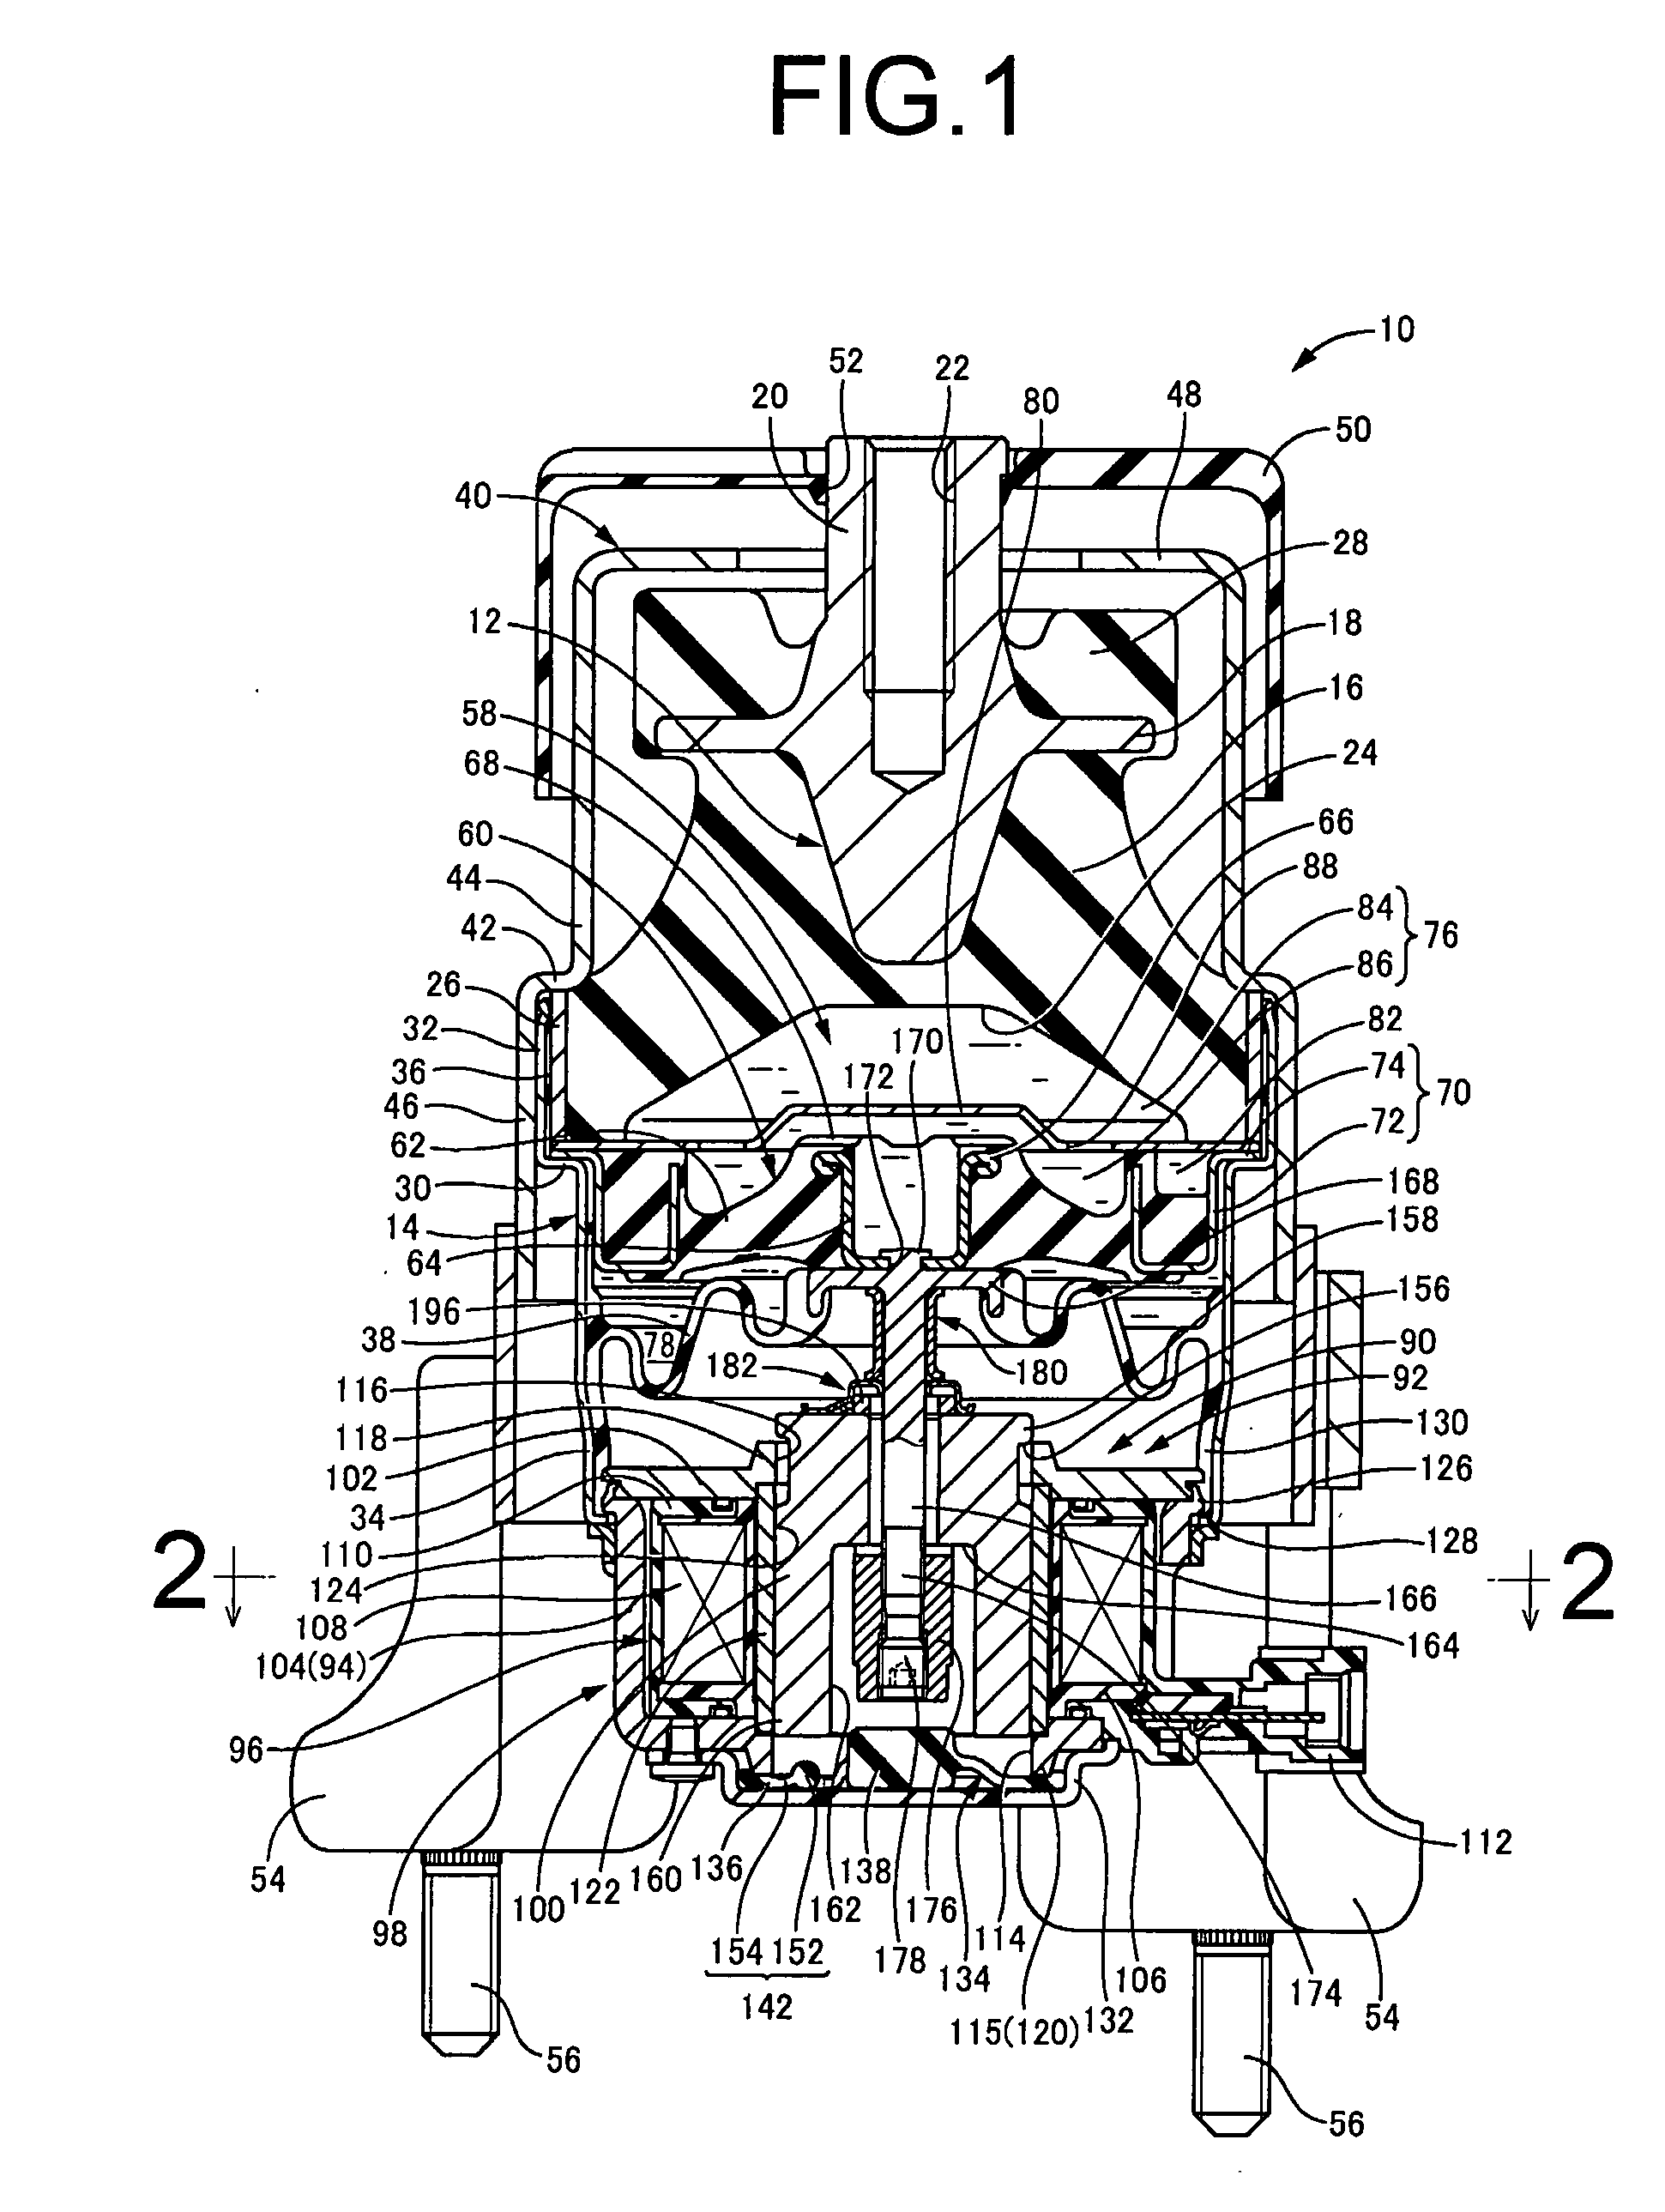 Electromagnetic actuator for active vibration damping device